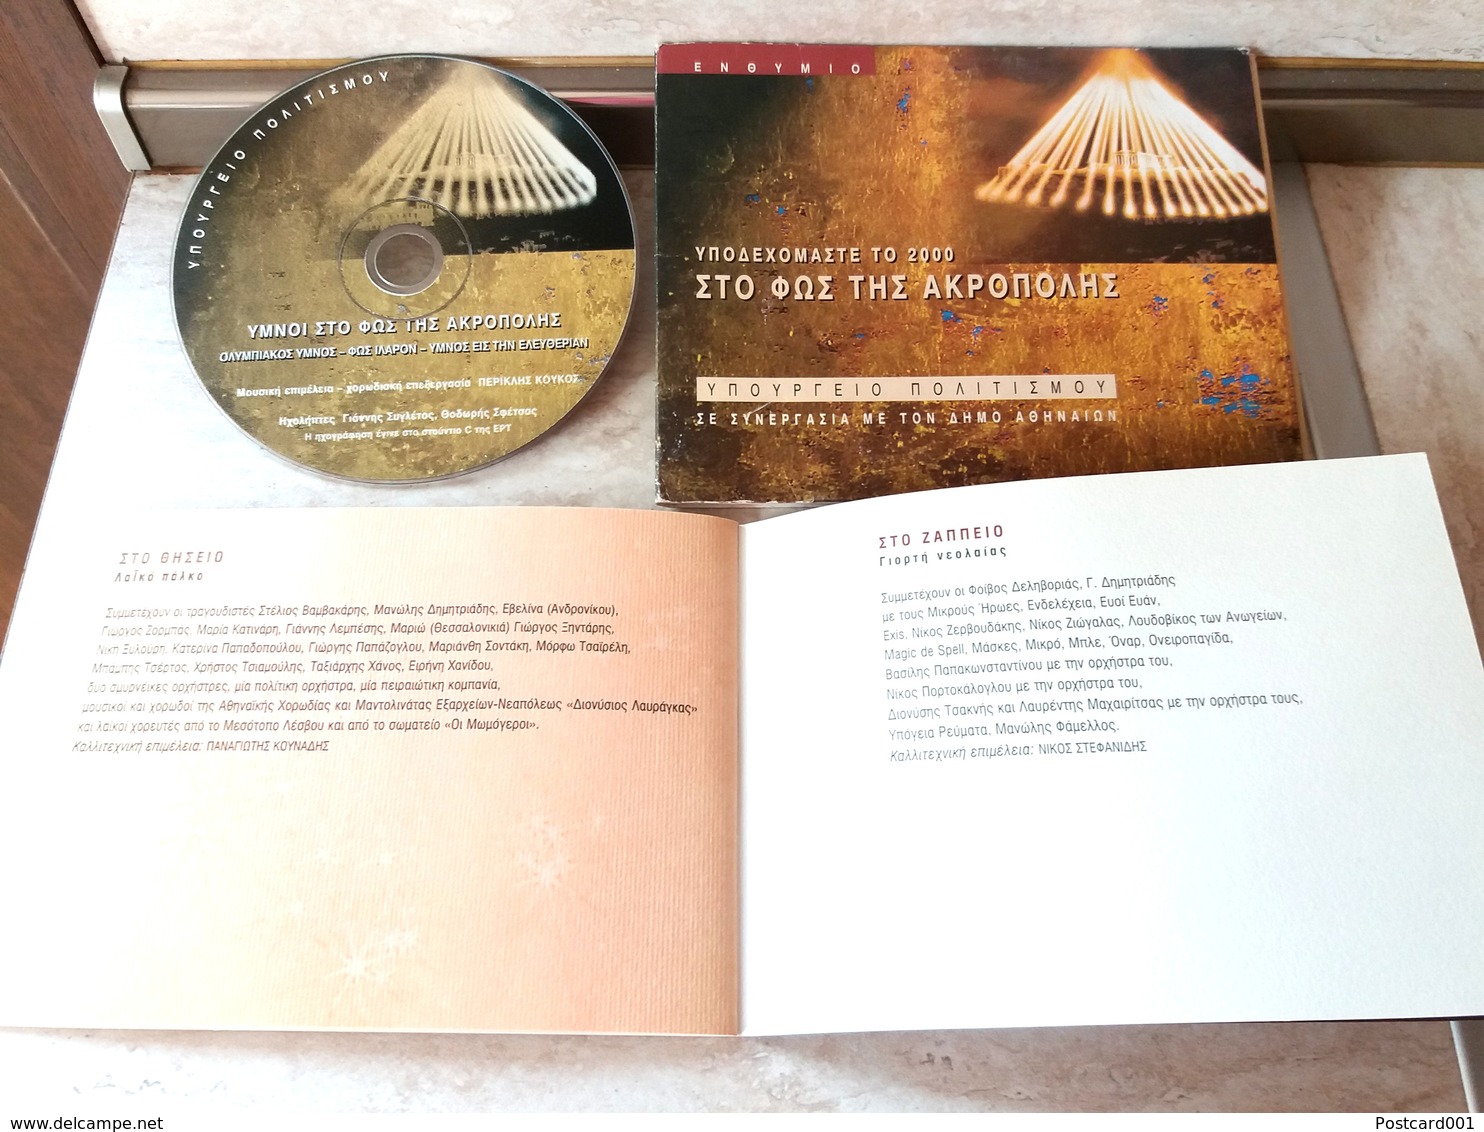 ACROPOLE IN LIGHT AND MUSIC - DVD AND BOOK WITH TEXTS OF GREEK SONGS (1) - Musik-DVD's